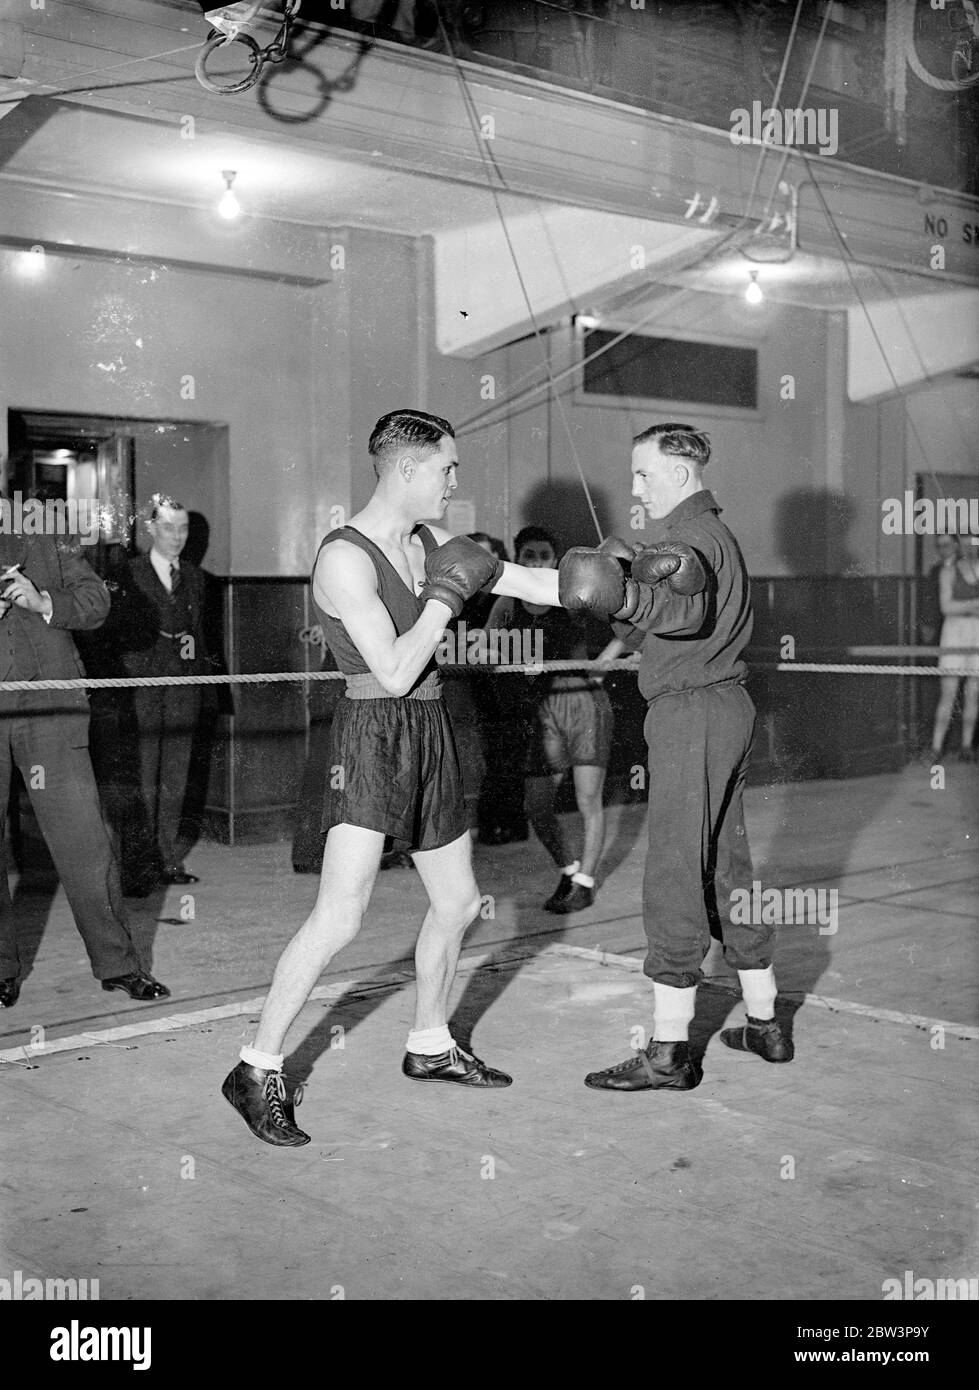 British amateur boxing champions train for ' Golden Gloves Tournament ' . The Amateur boxing champions who are to compose the British team for the ' Golden Gloves ' tournament against the American ' Golden Glovers ' are training at the Polytechnic in London to repeat Britain ' s success of last year when the forthcoming matches are held . The tournament opens at the Empire Pool Wembley , May 5 . Photo shows F J Simpson the British amateur lightweight champion ( left ) sparring with J W Treadaway ( featherweight champion ) . April 1936 Stock Photo